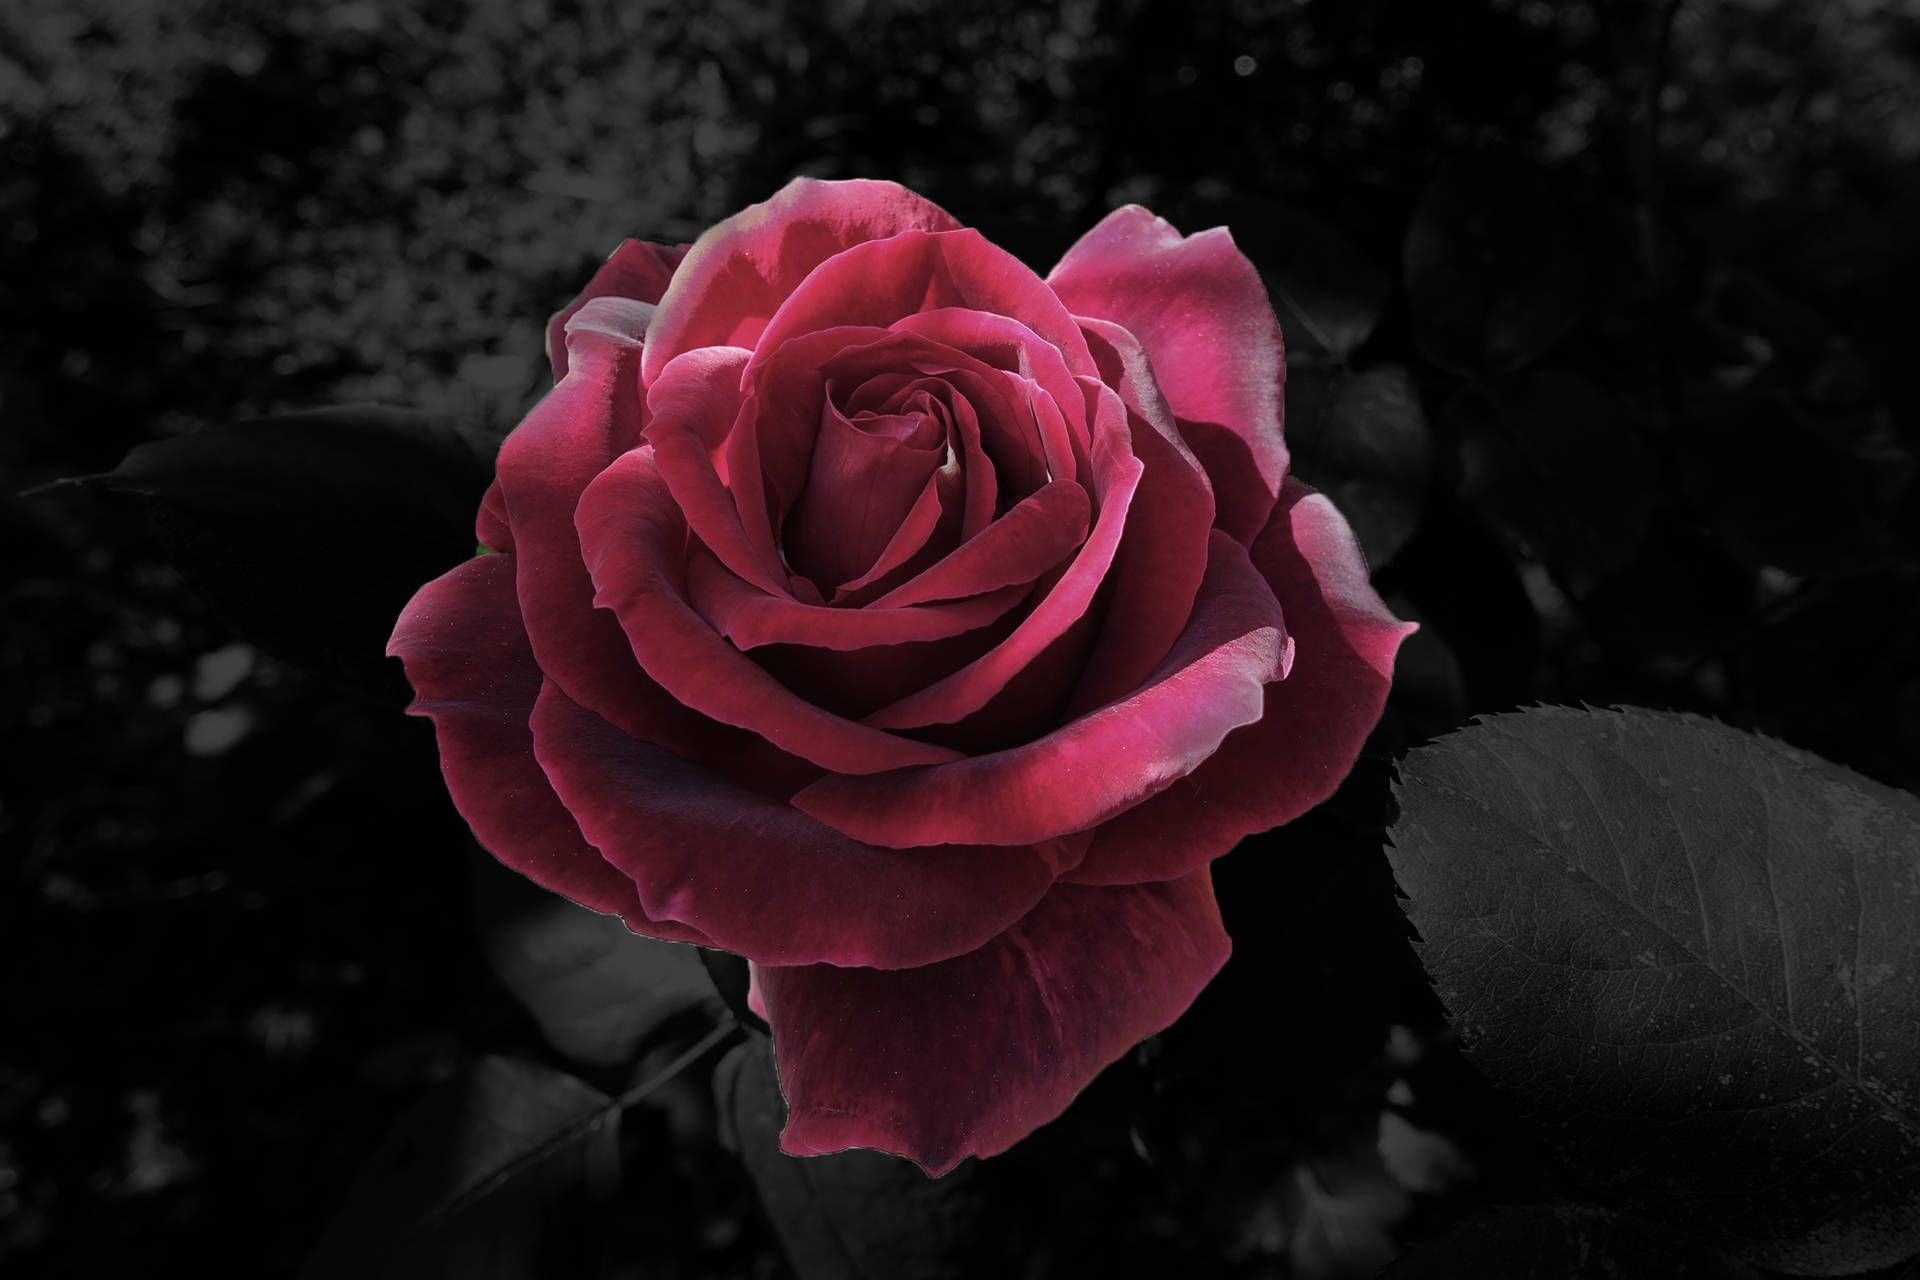 A red rose with black and white background - Roses, black rose